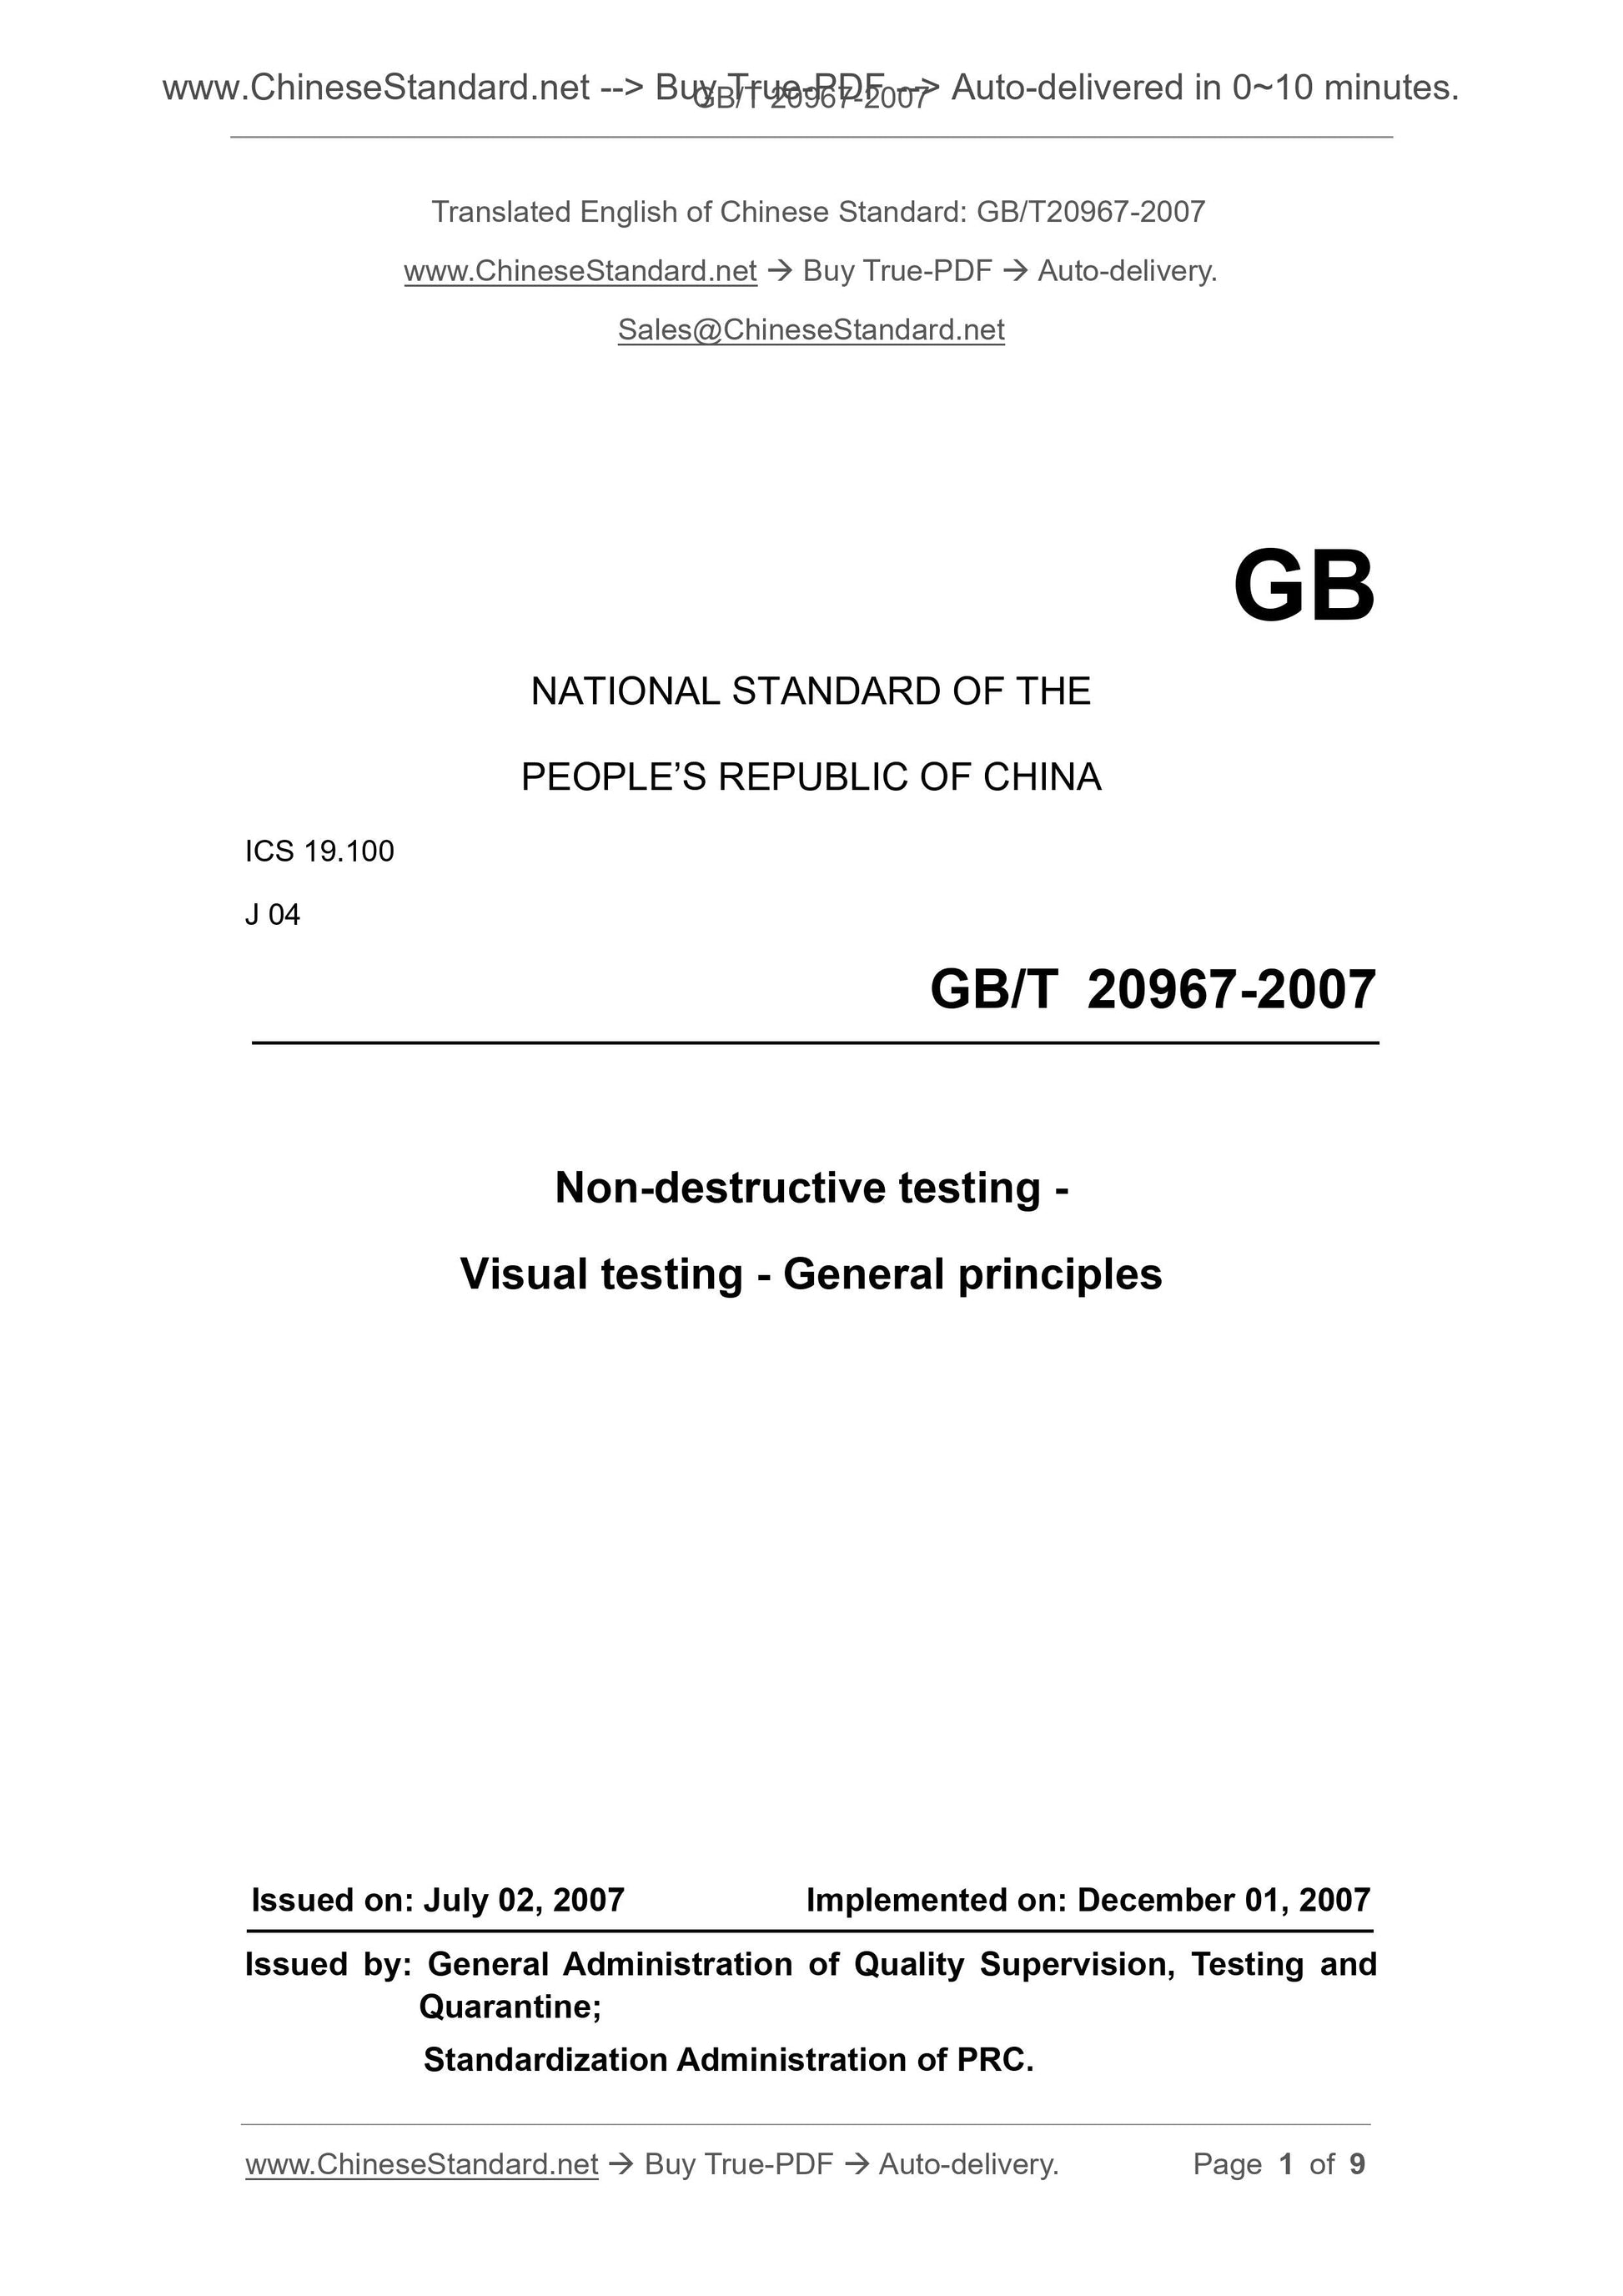 GB/T 20967-2007 Page 1